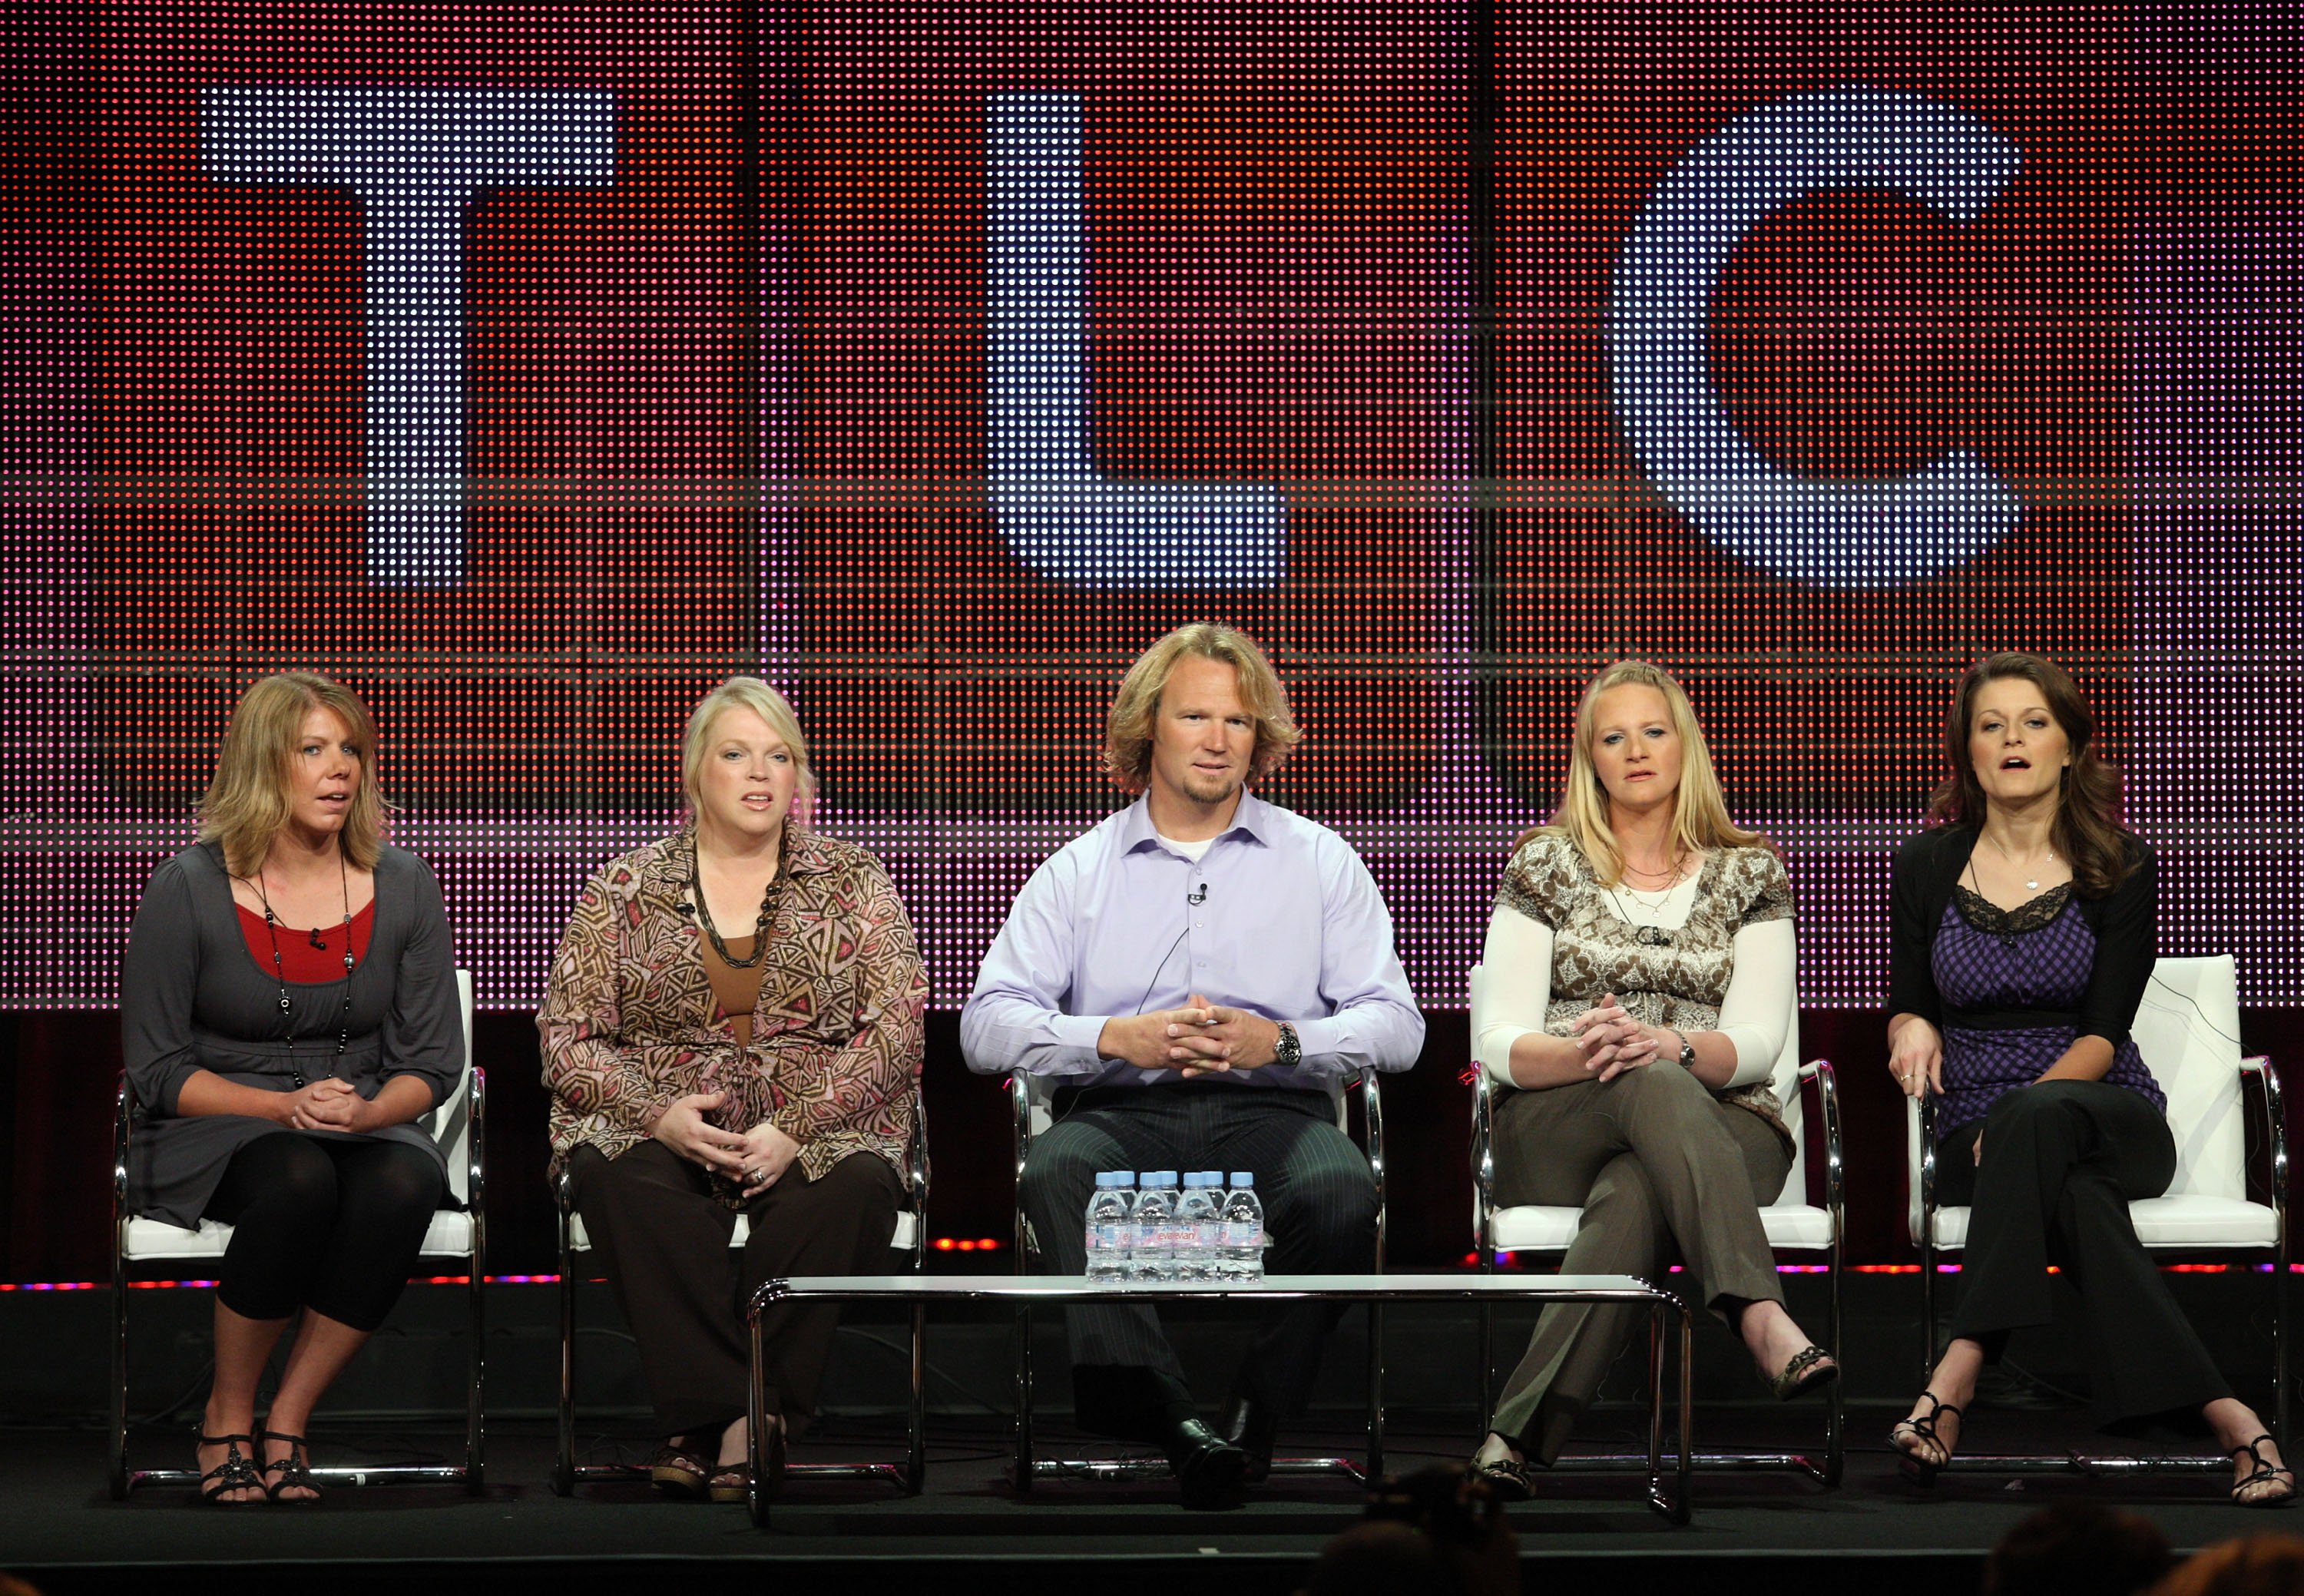 Meri Brown, Janelle Brown, Kody Brown, Christine Brown and Robyn Brown on stage at the Summer TCA Press Tour in 2010